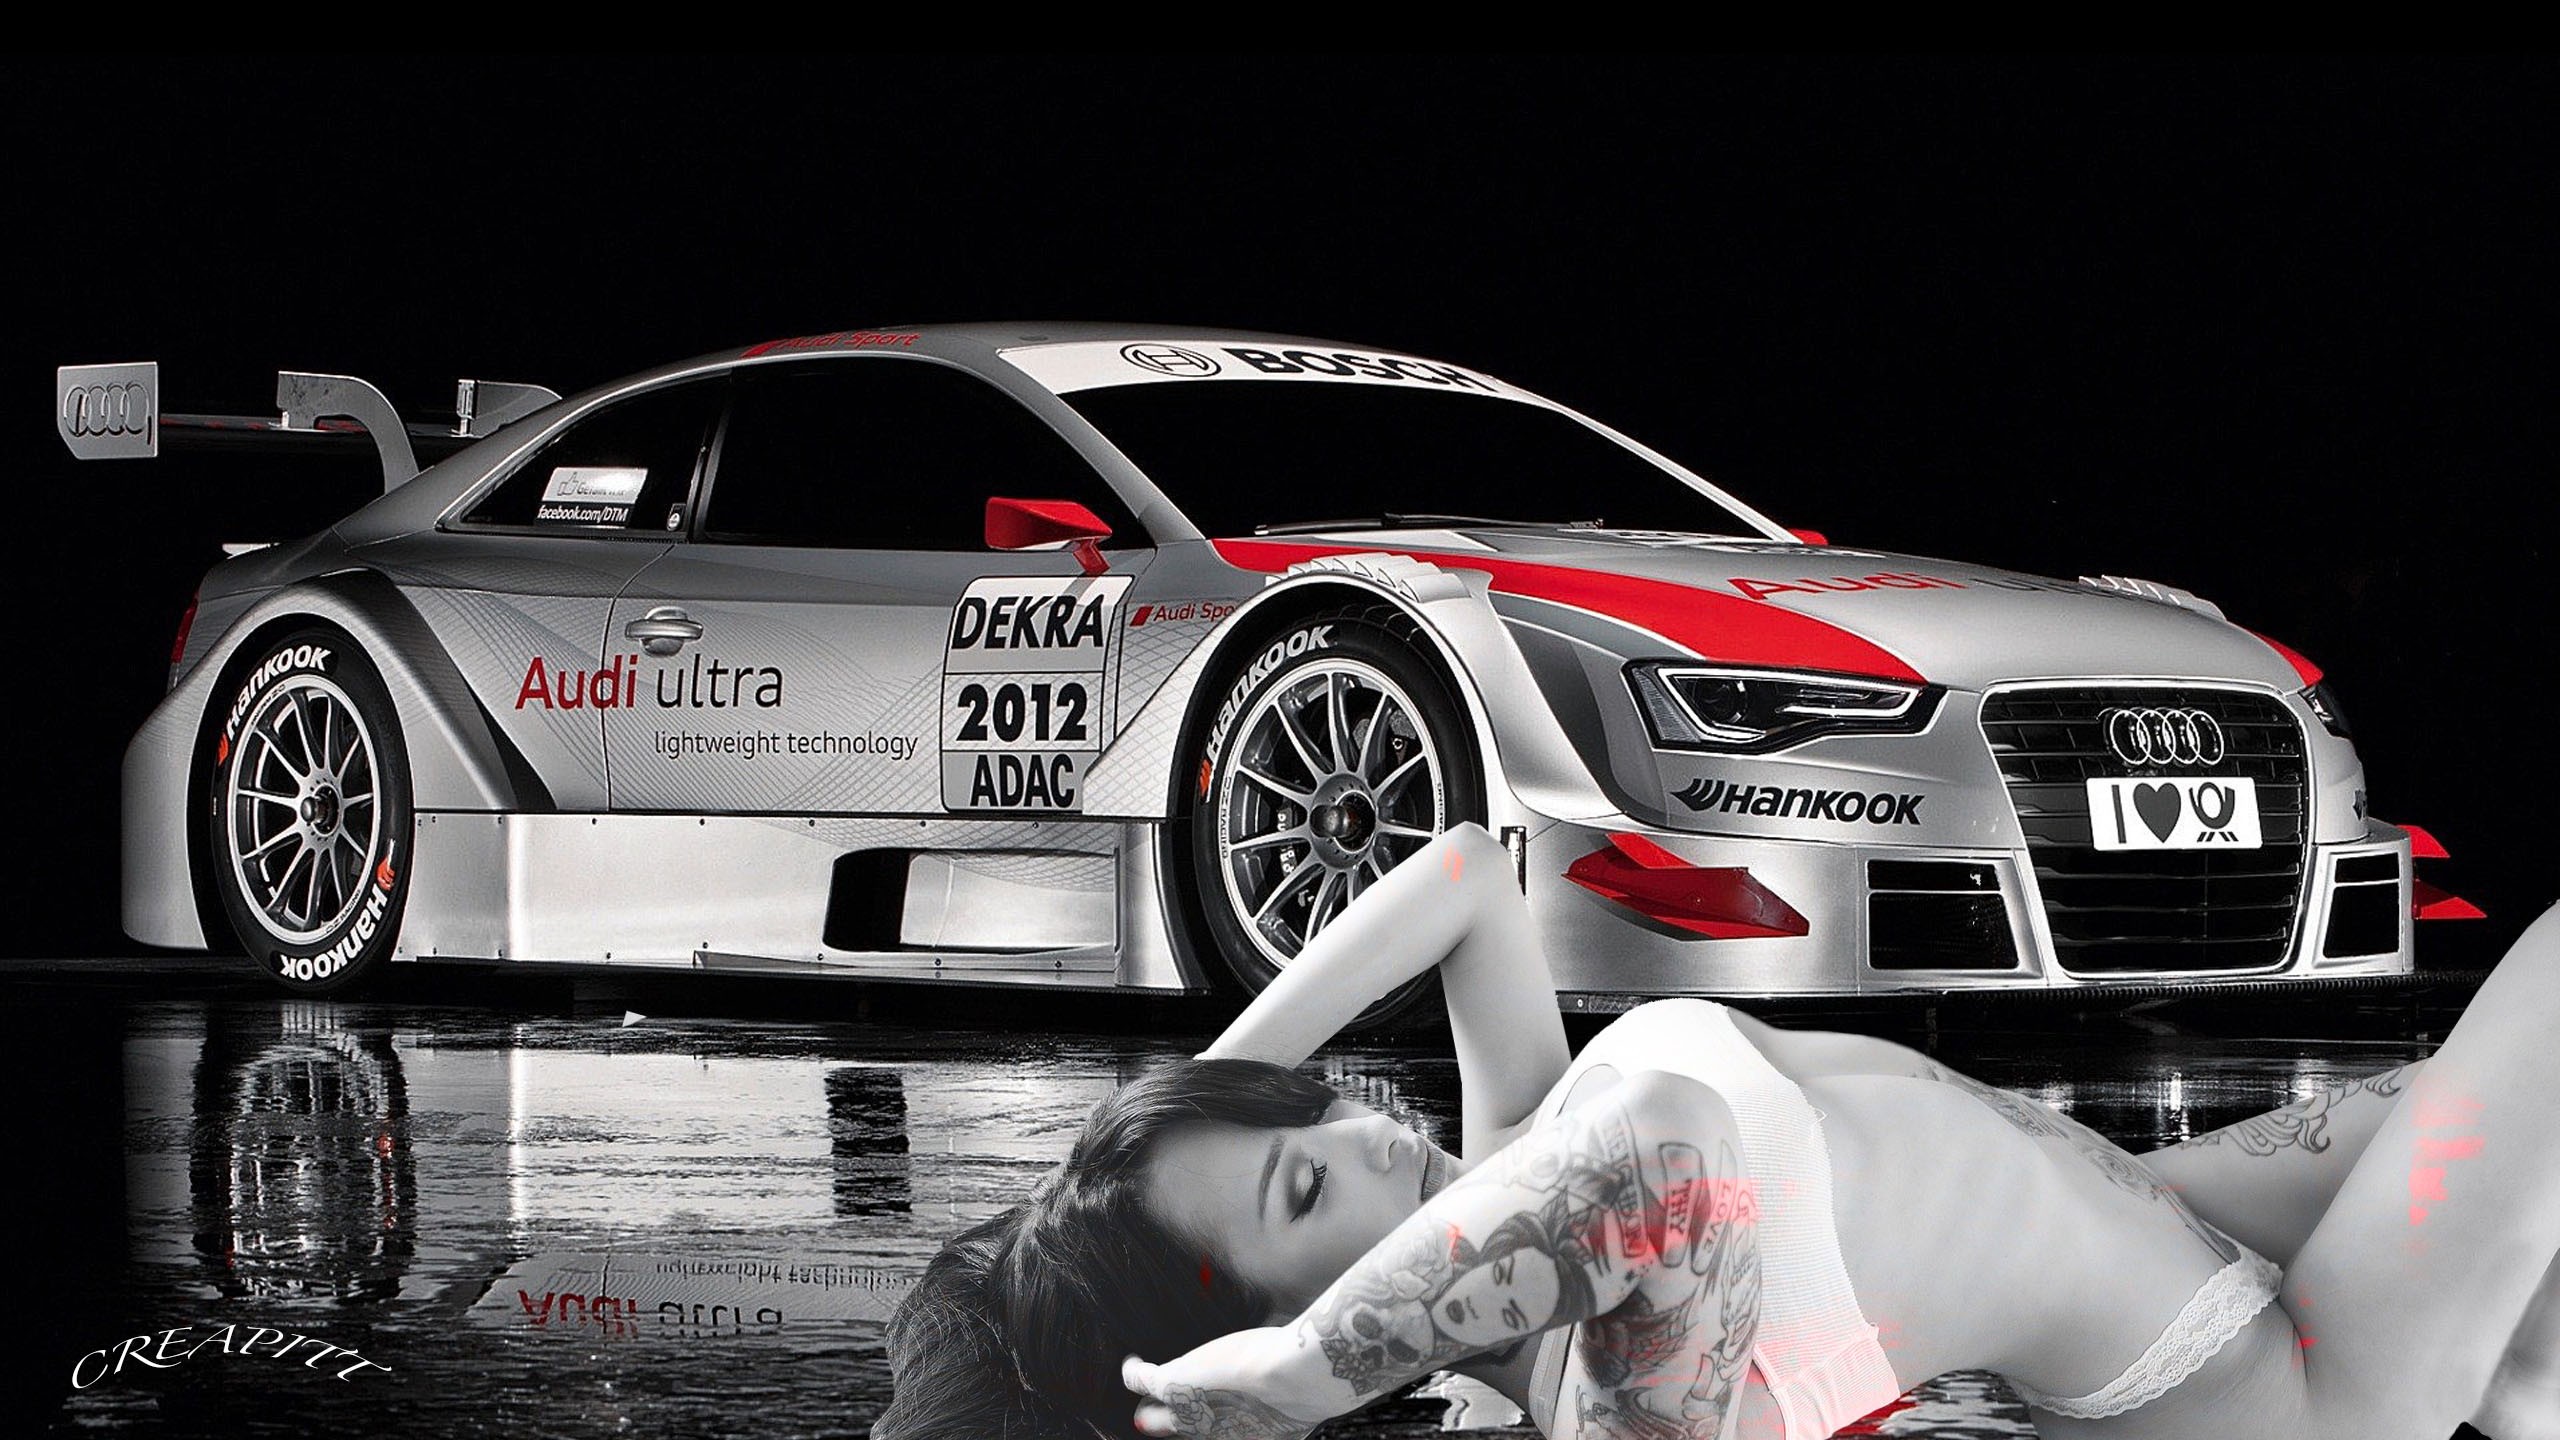 People 2560x1440 Audi car vehicle silver cars racing motorsport race cars black background simple background women model hair over one eye closed eyes selective coloring sport numbers 2012 (Year) belly bra panties inked girls arched back heart (design) watermarked